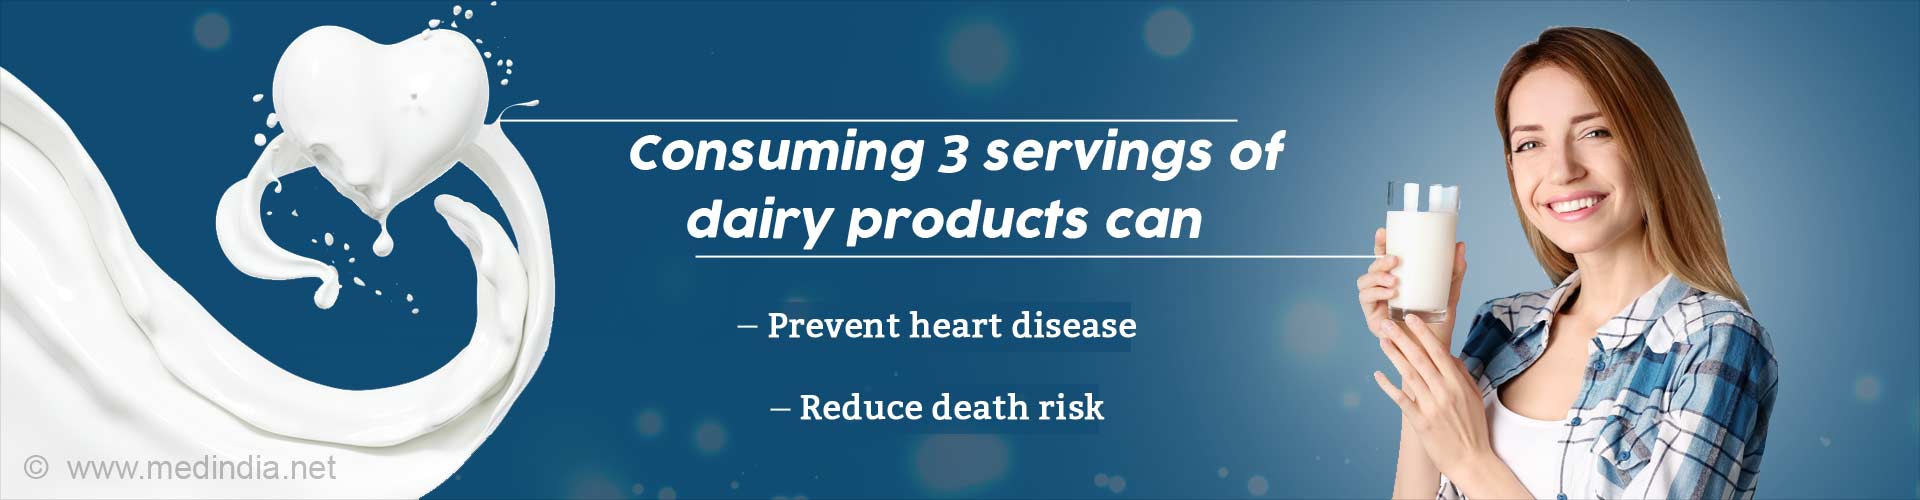 Consuming 3 servings of dairy products can prevent heart disease, reduce death risk.